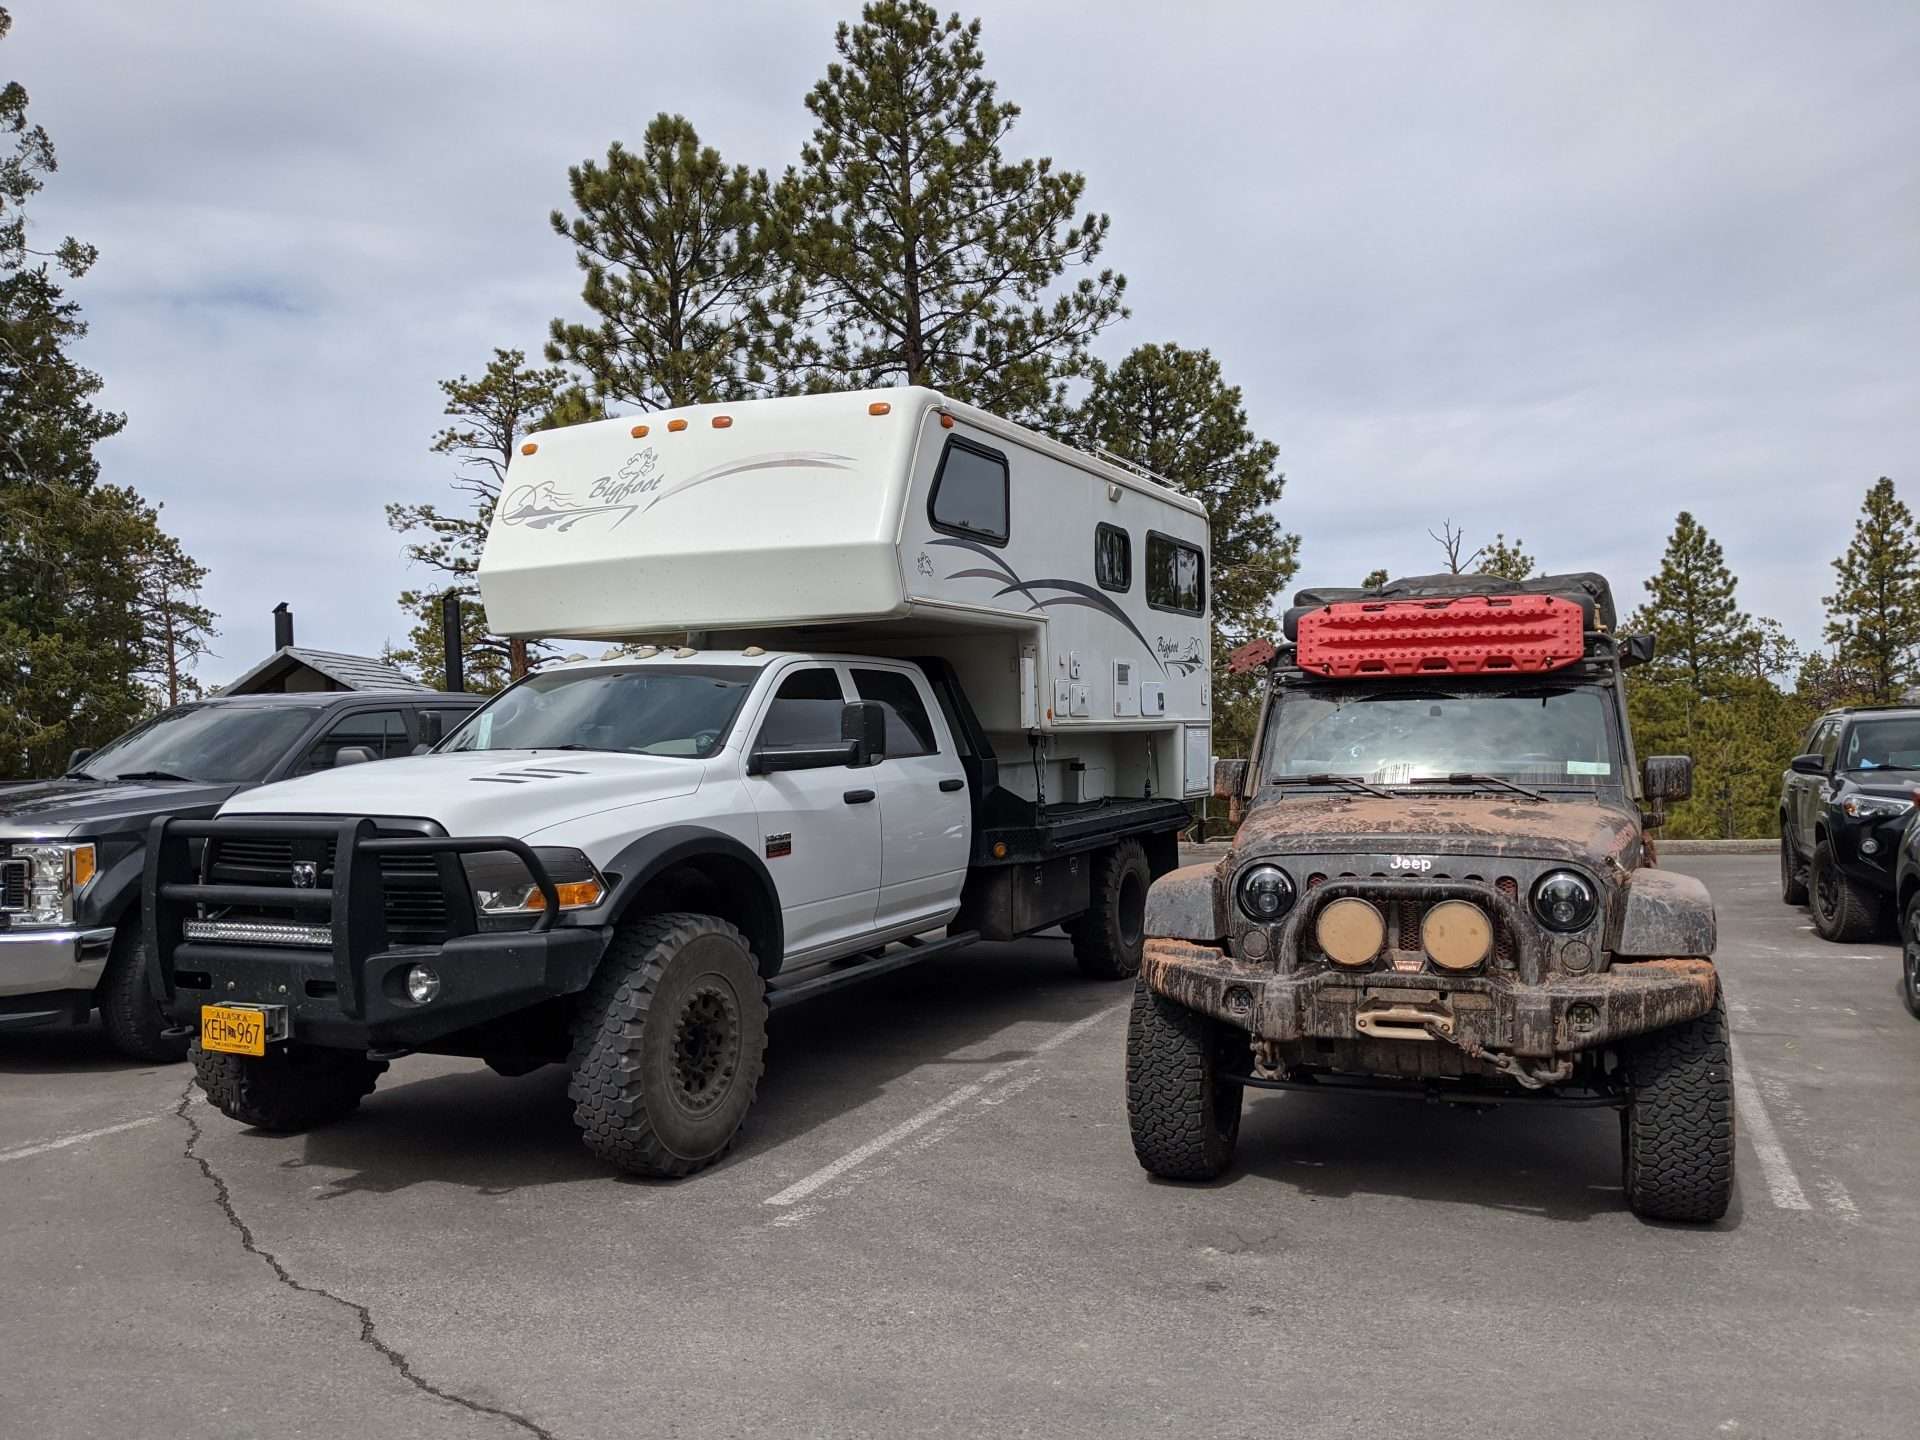 Morton's overland truck camper next to an off-road Jeep